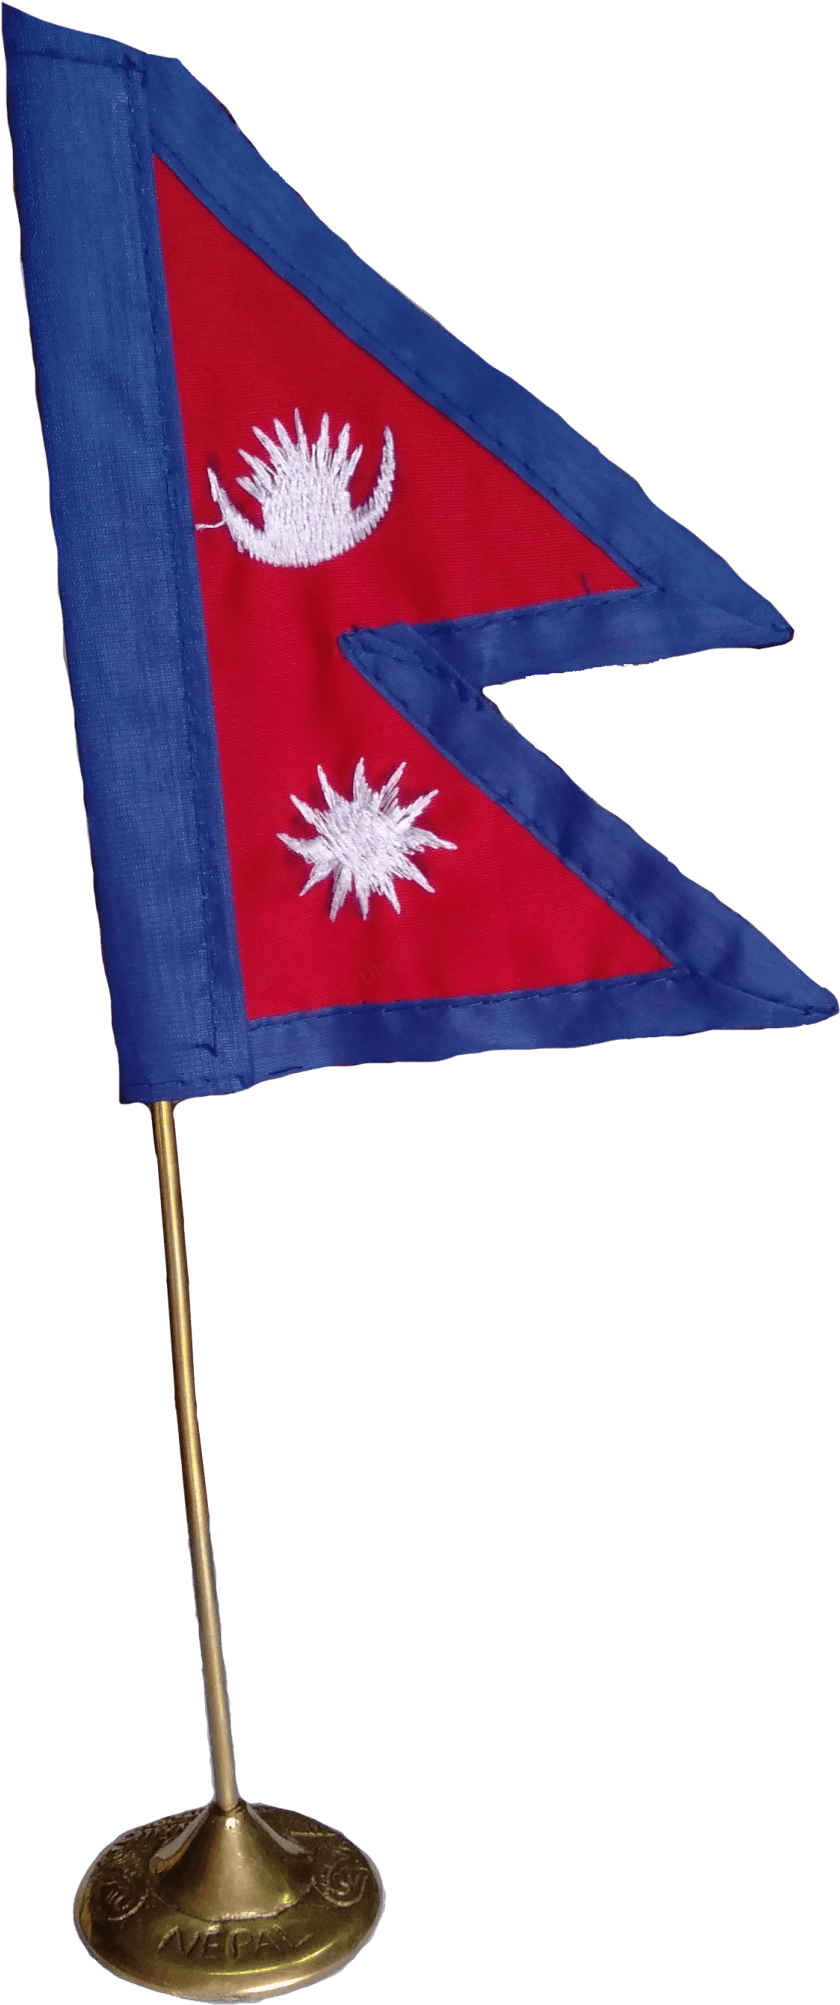 A Red And Blue Flag With A White Star On It